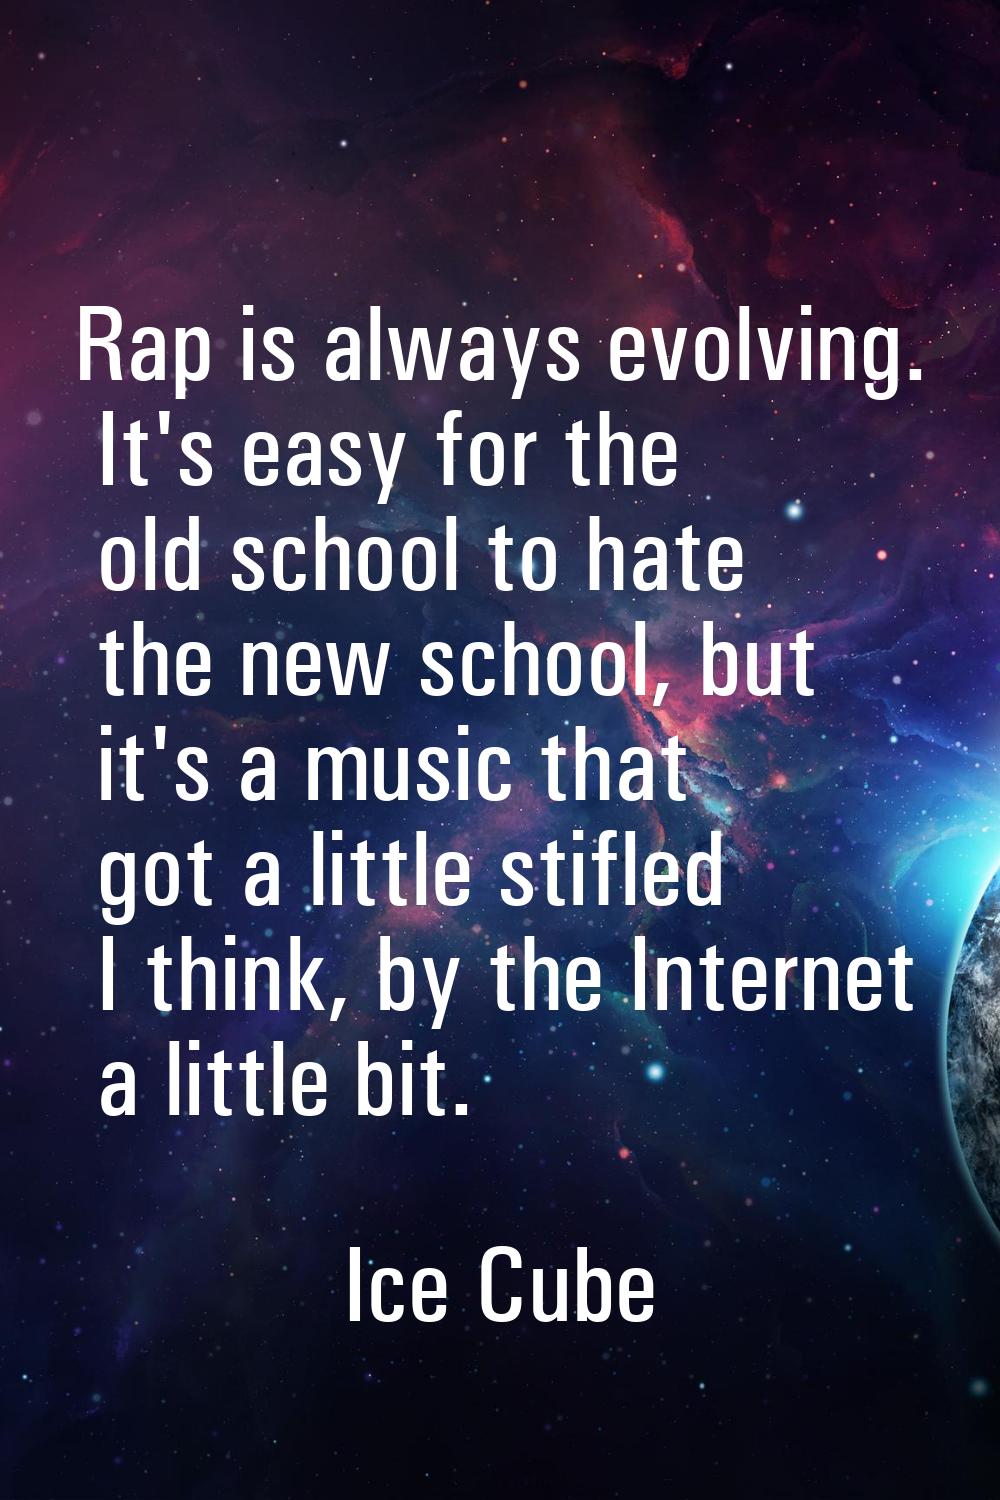 Rap is always evolving. It's easy for the old school to hate the new school, but it's a music that 